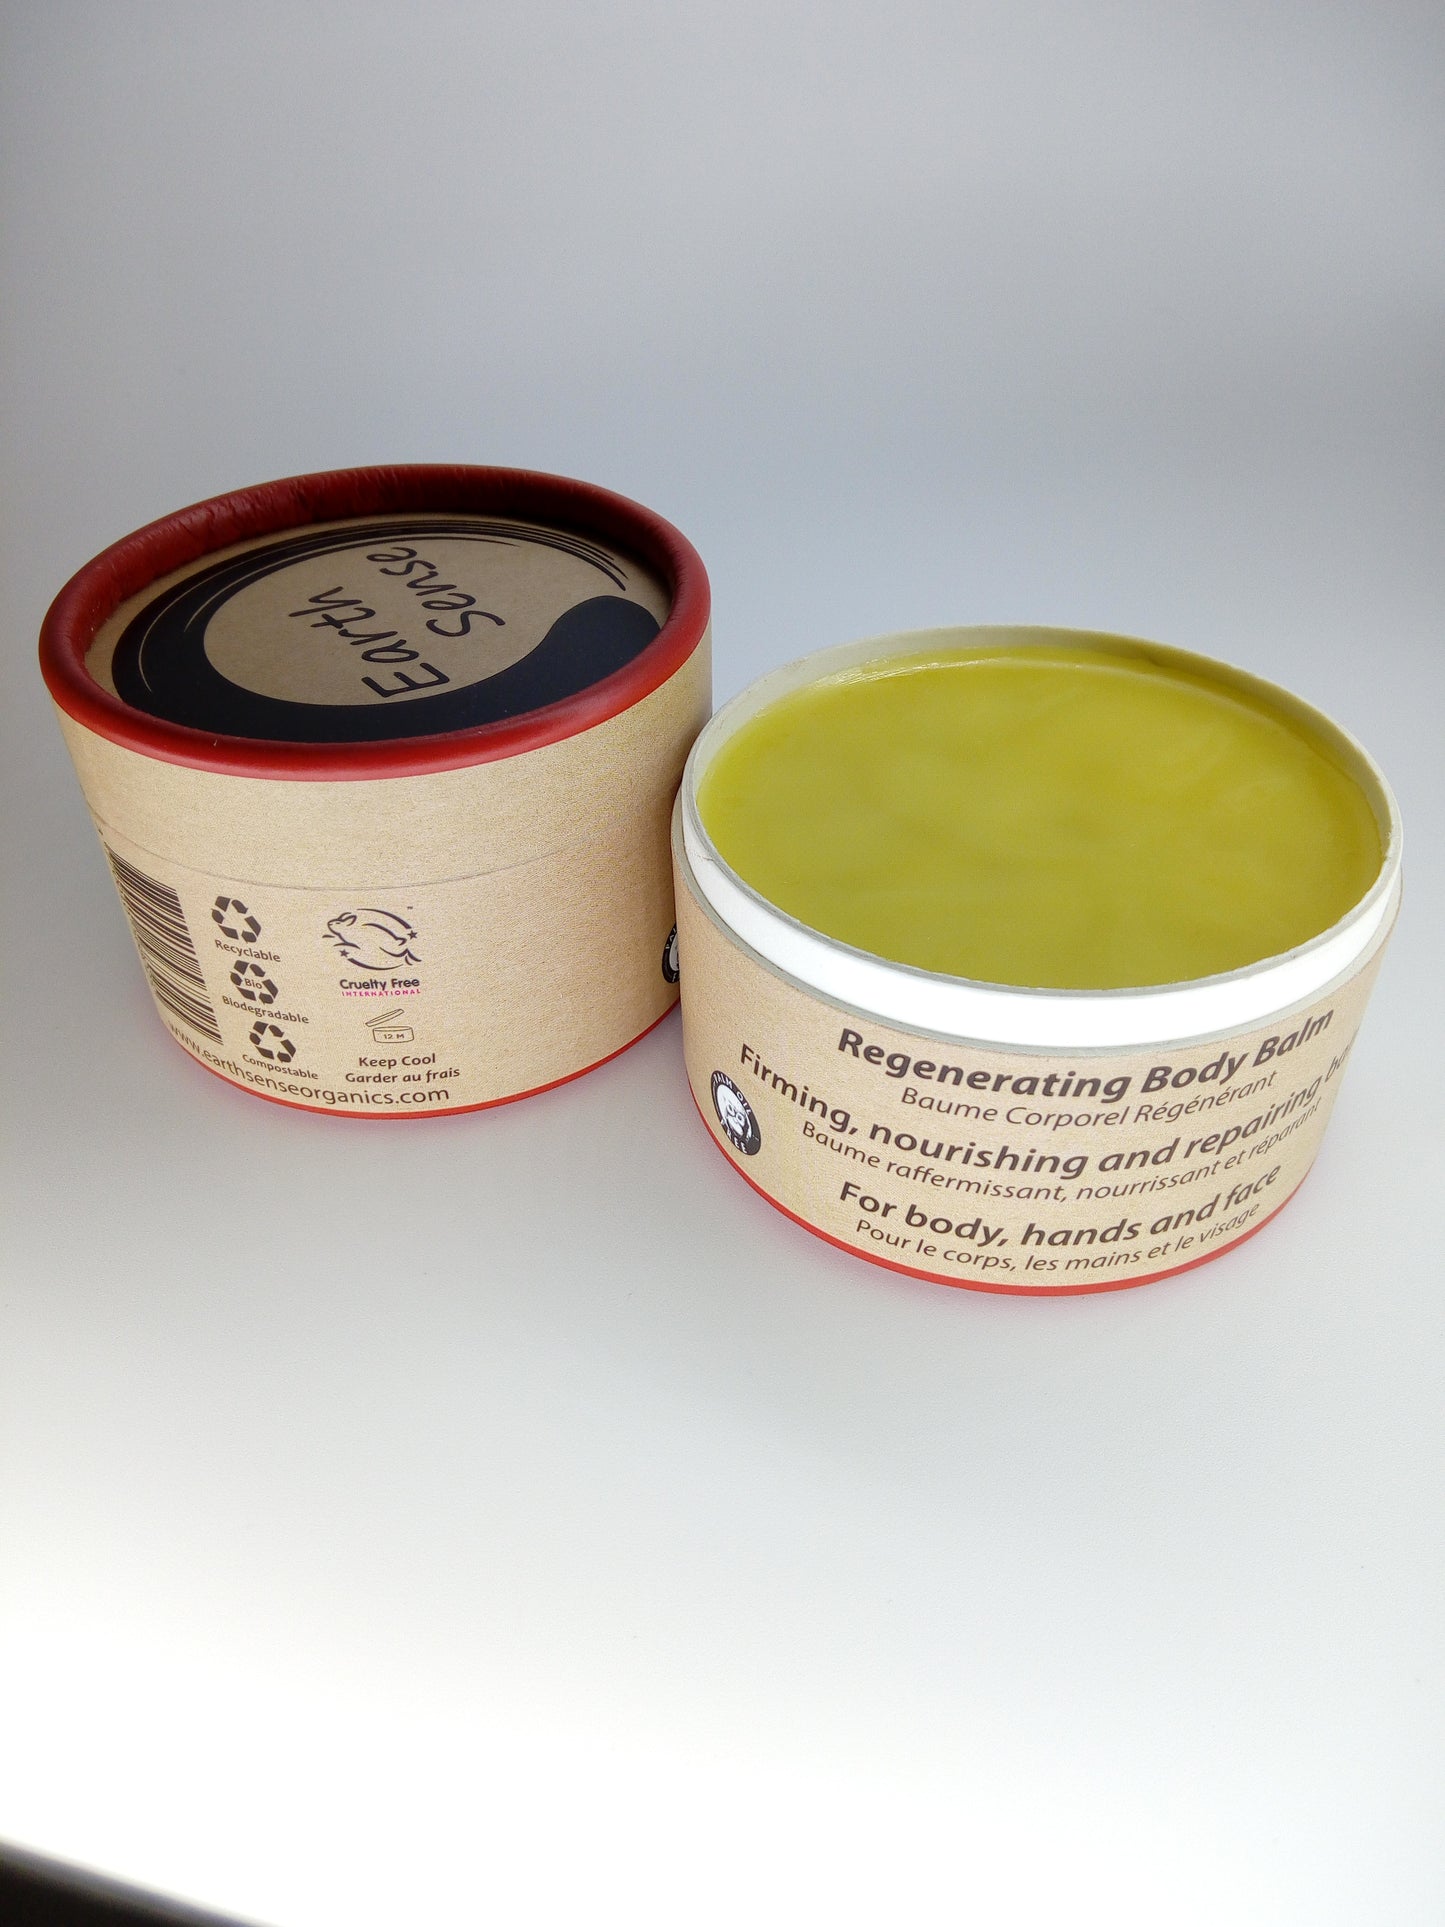 Organic Regenerating Body Balm with Ylang Ylang 100ml - For Face, hands and whole body - Earthsenseorganics